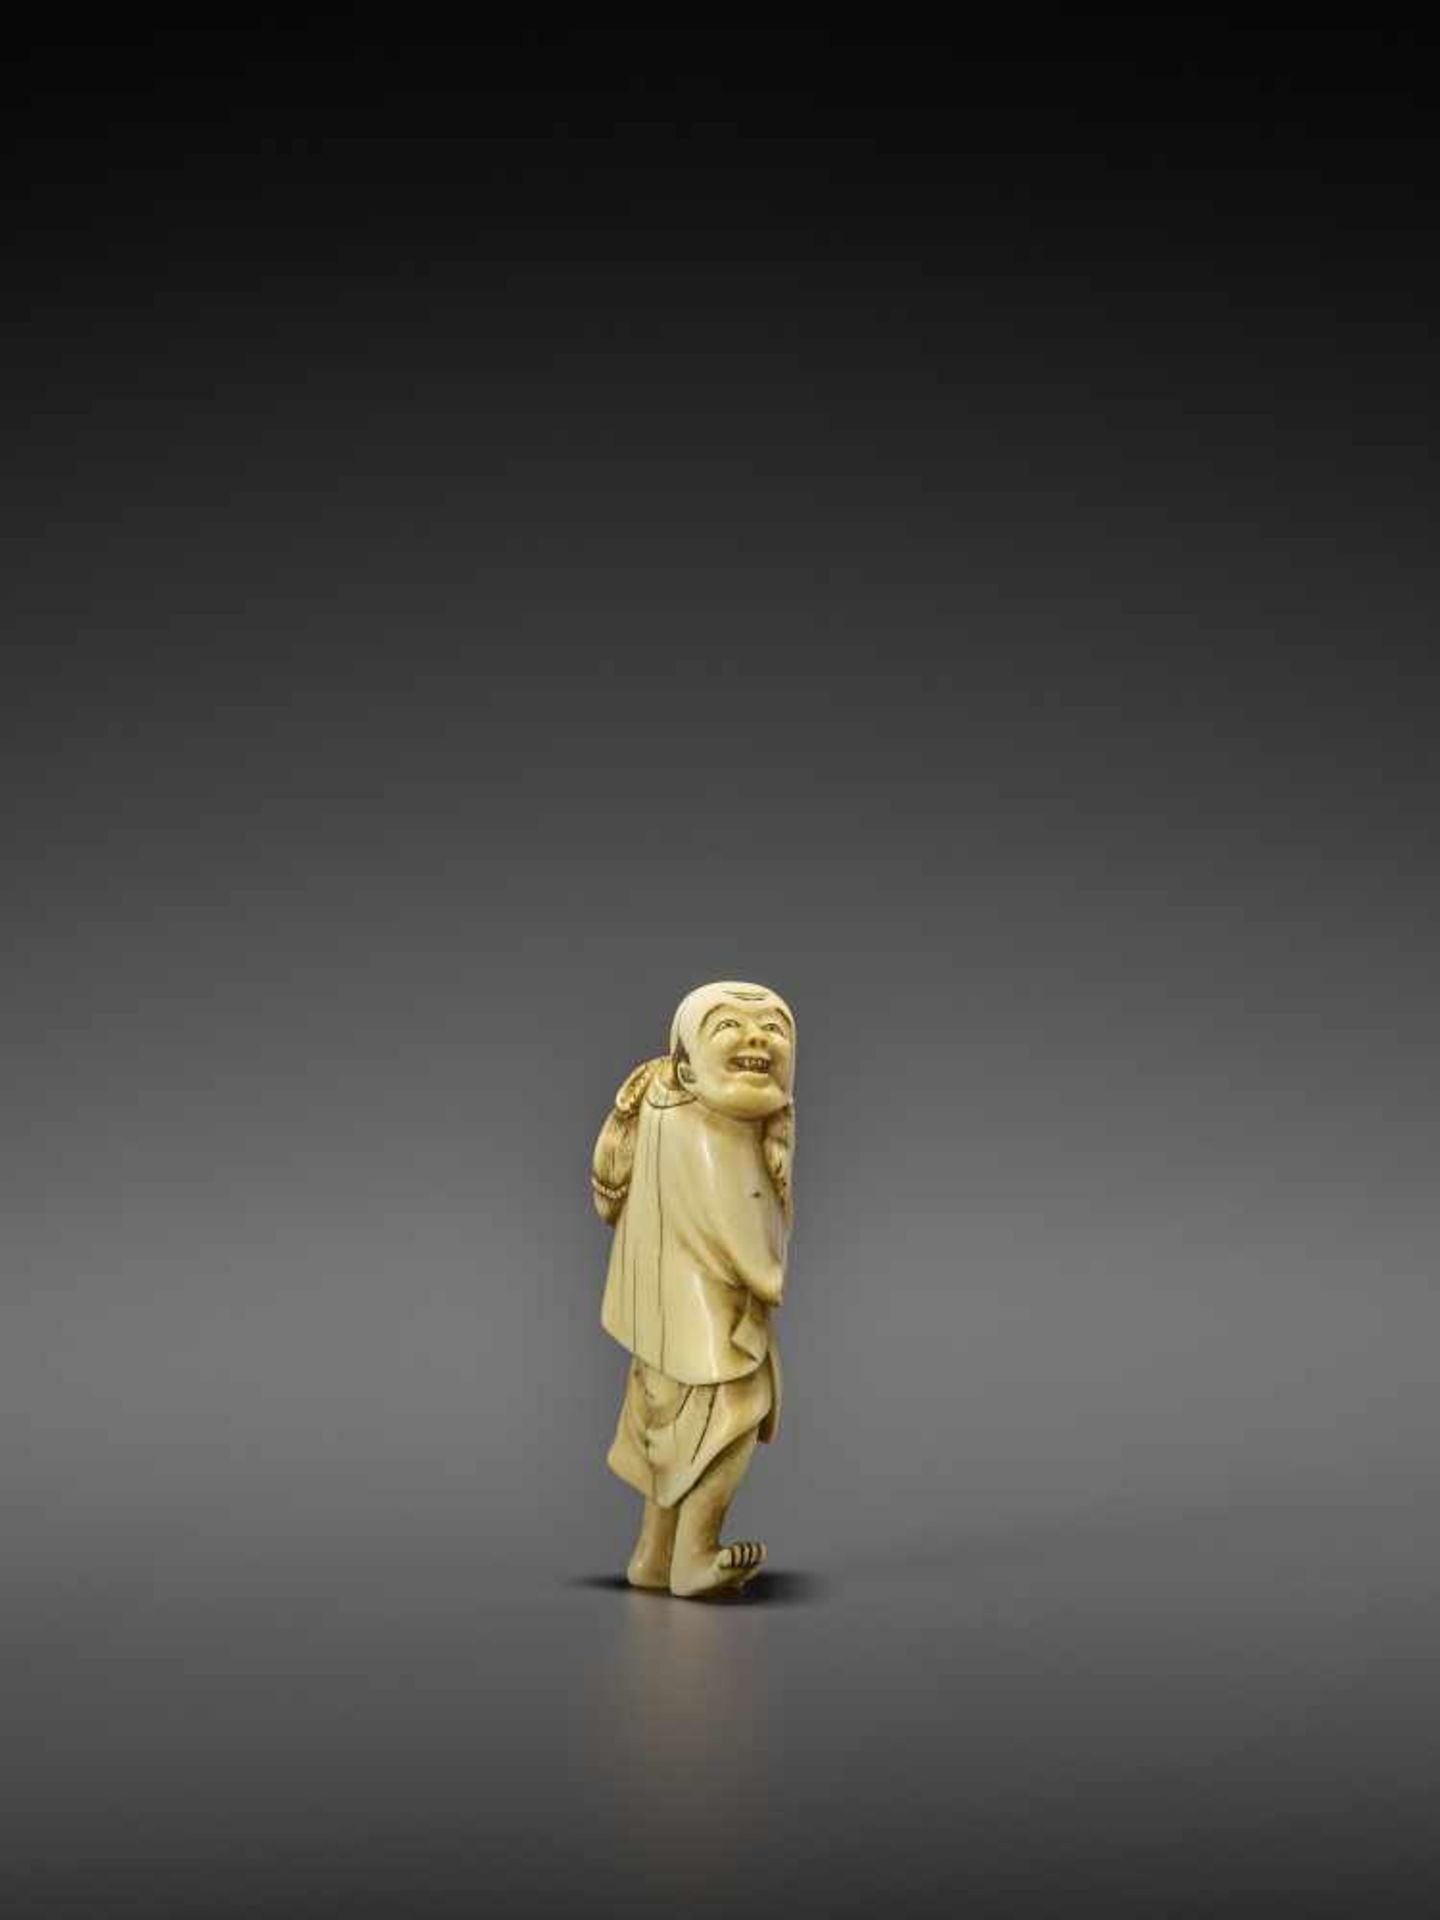 AN IVORY NETSUKE OF A PERSIMMON MERCHANT UnsignedJapan, early 19th century, Edo period (1615-1868) - Image 7 of 10